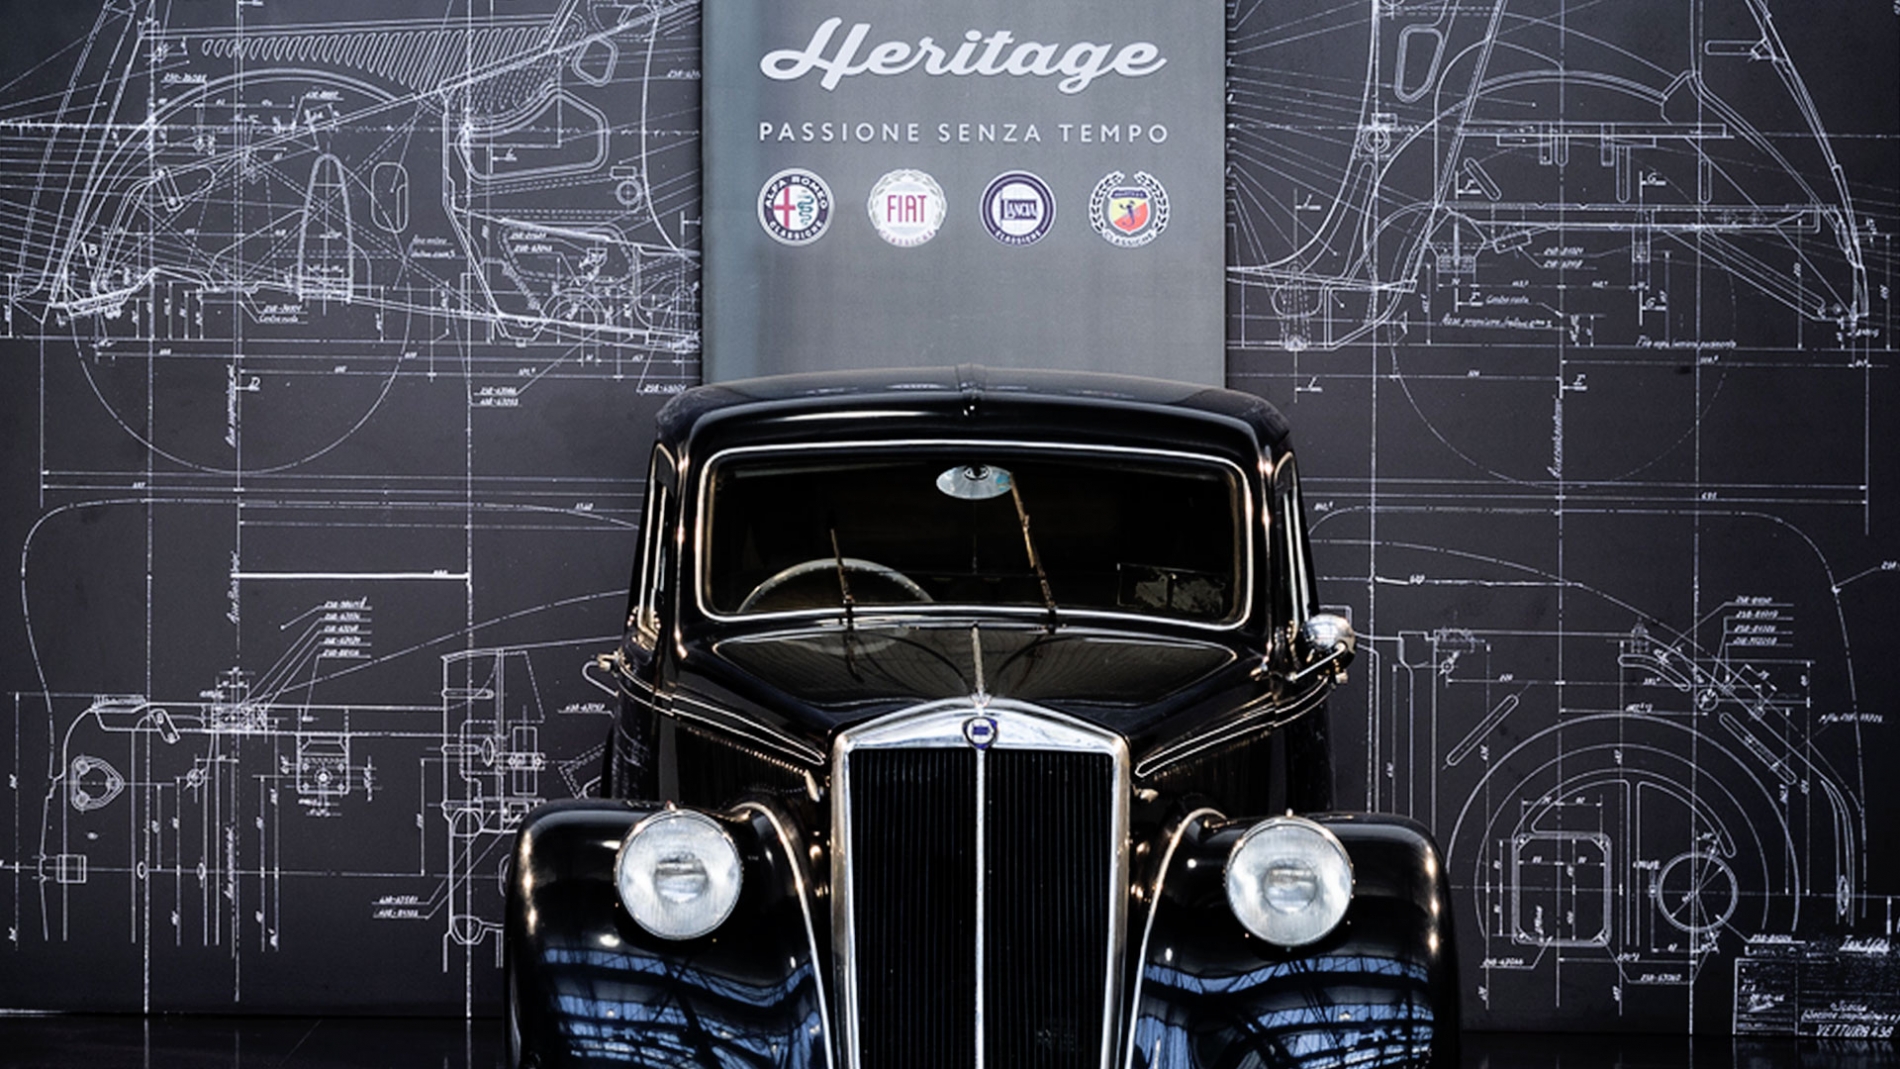 A new look for FCA Heritage’s Officine Classiche